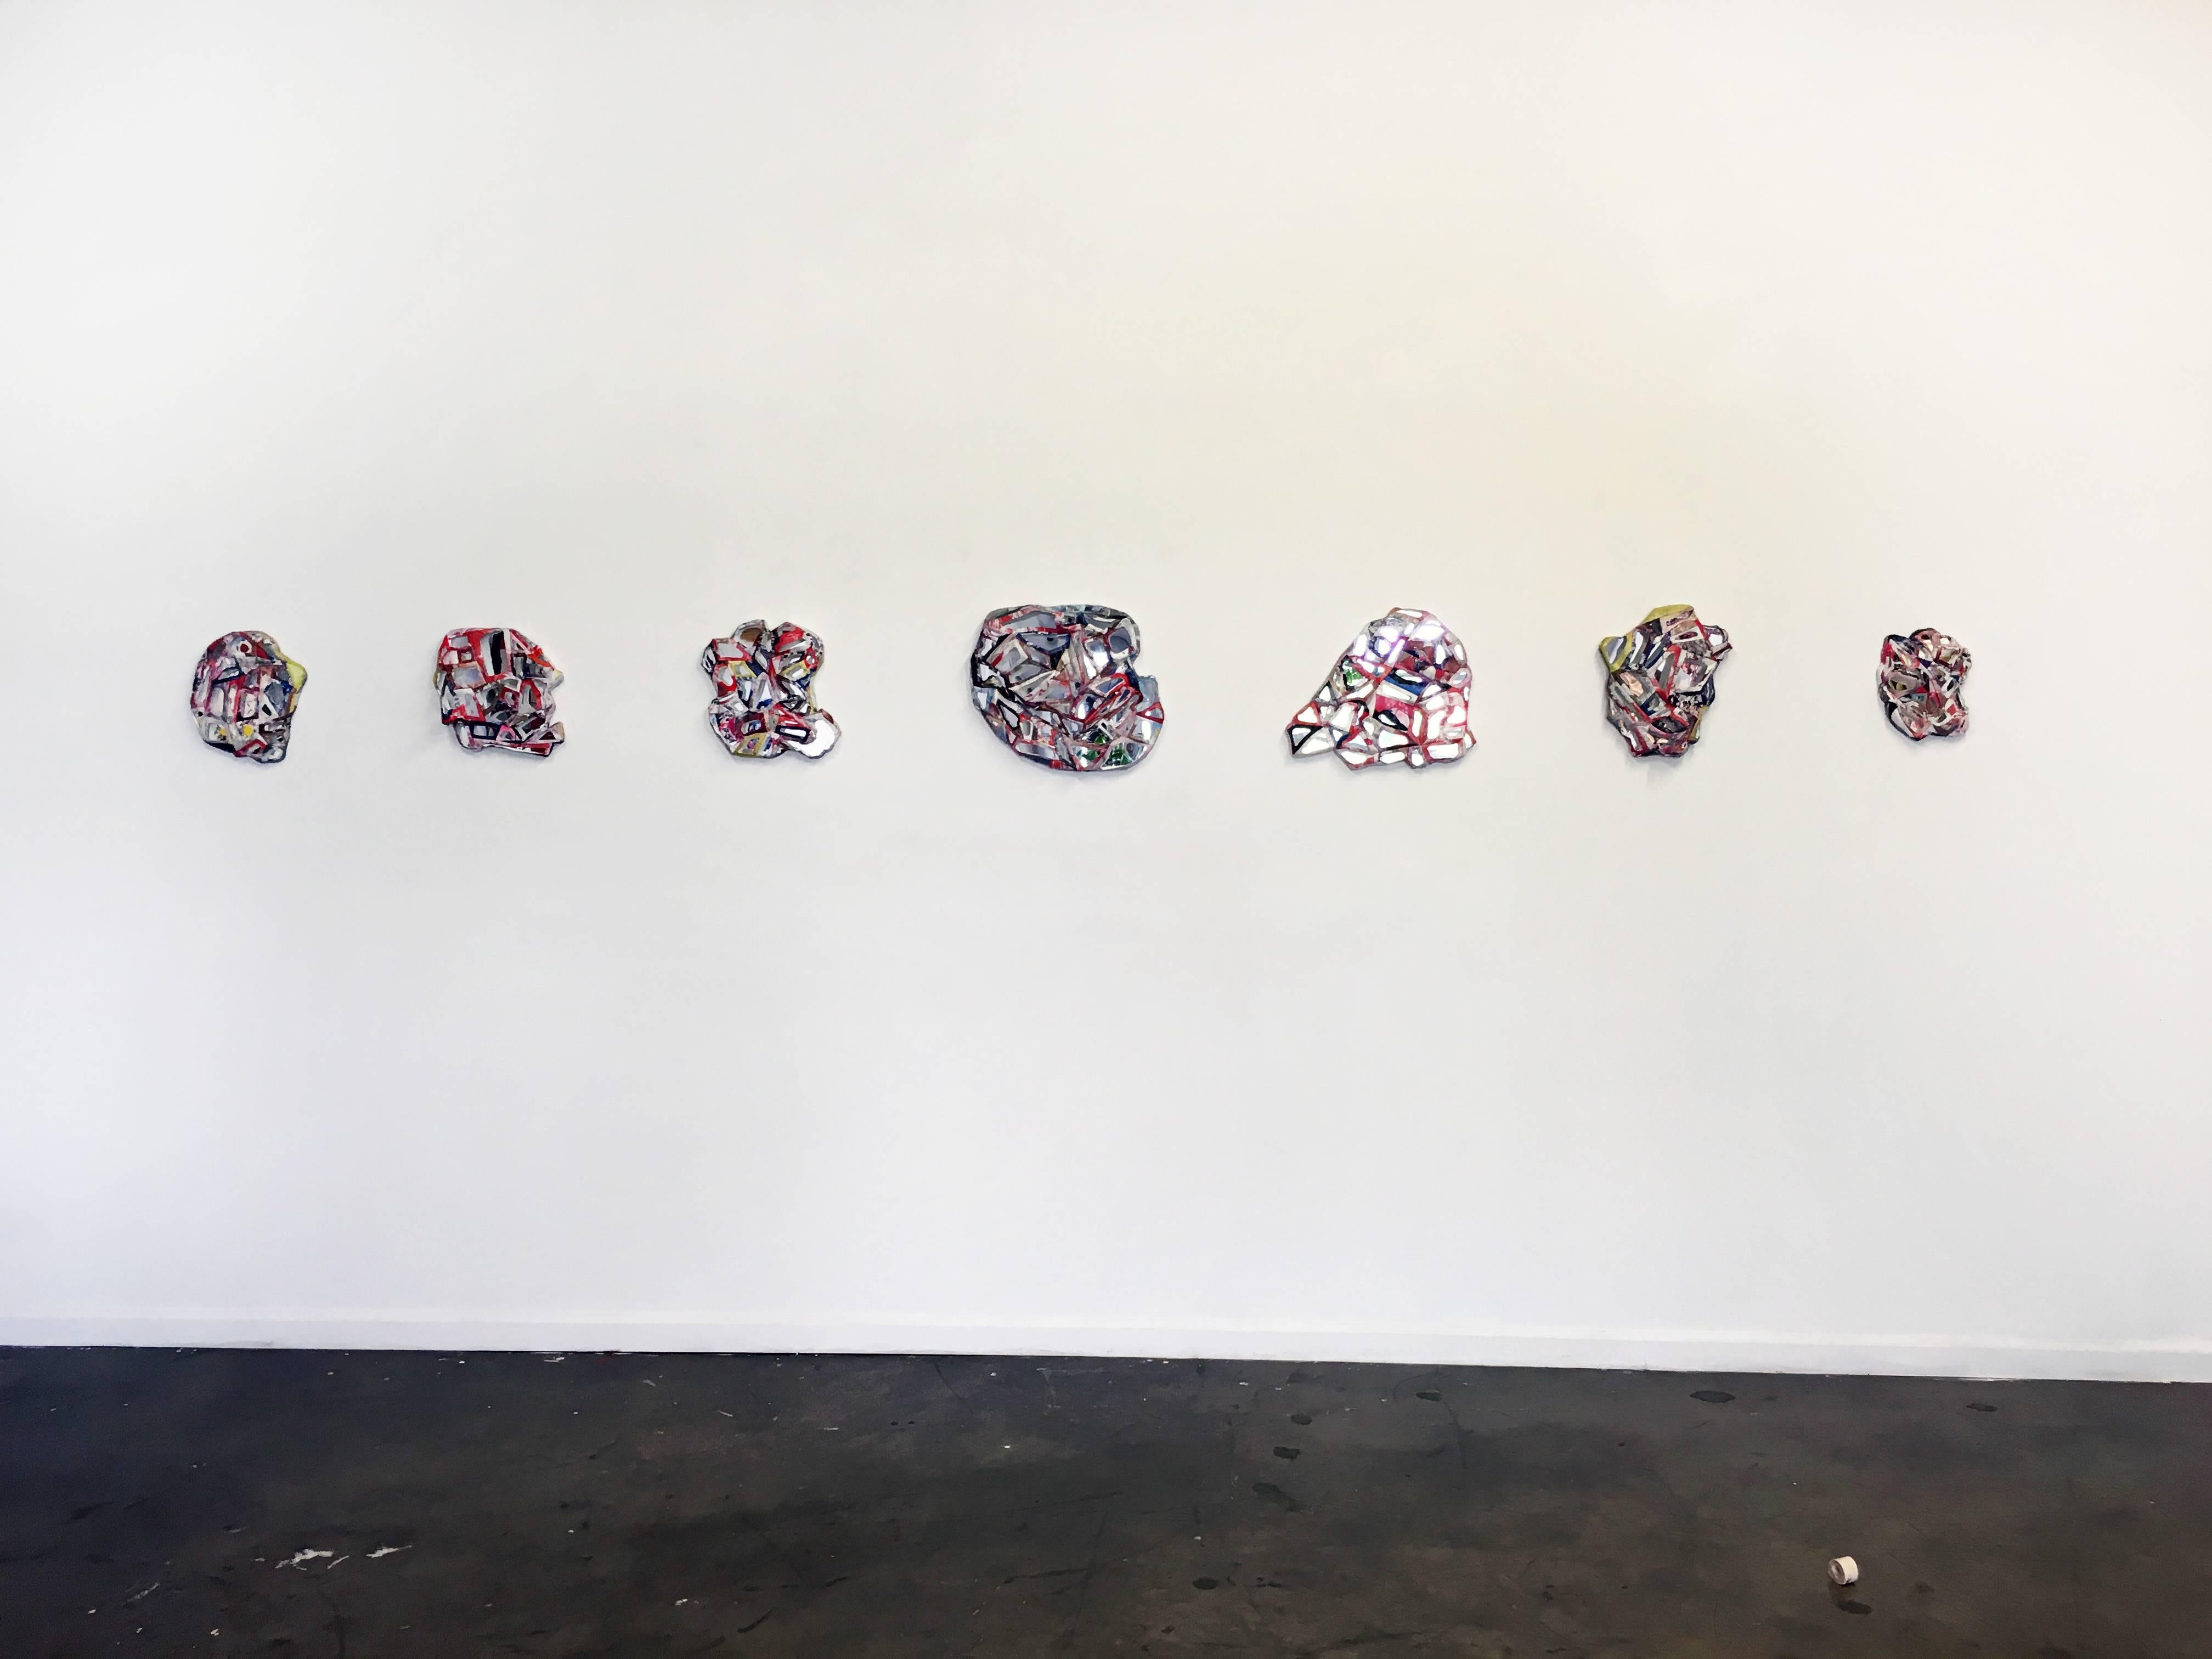 Jason Willaford's Me Monsters represent the many facades of humanity and the layers of a disguise. Each Me Monster is created with flat vinyl that is sewn and transformed into a rigid structure reminiscent of a mask. Behind this created facade,